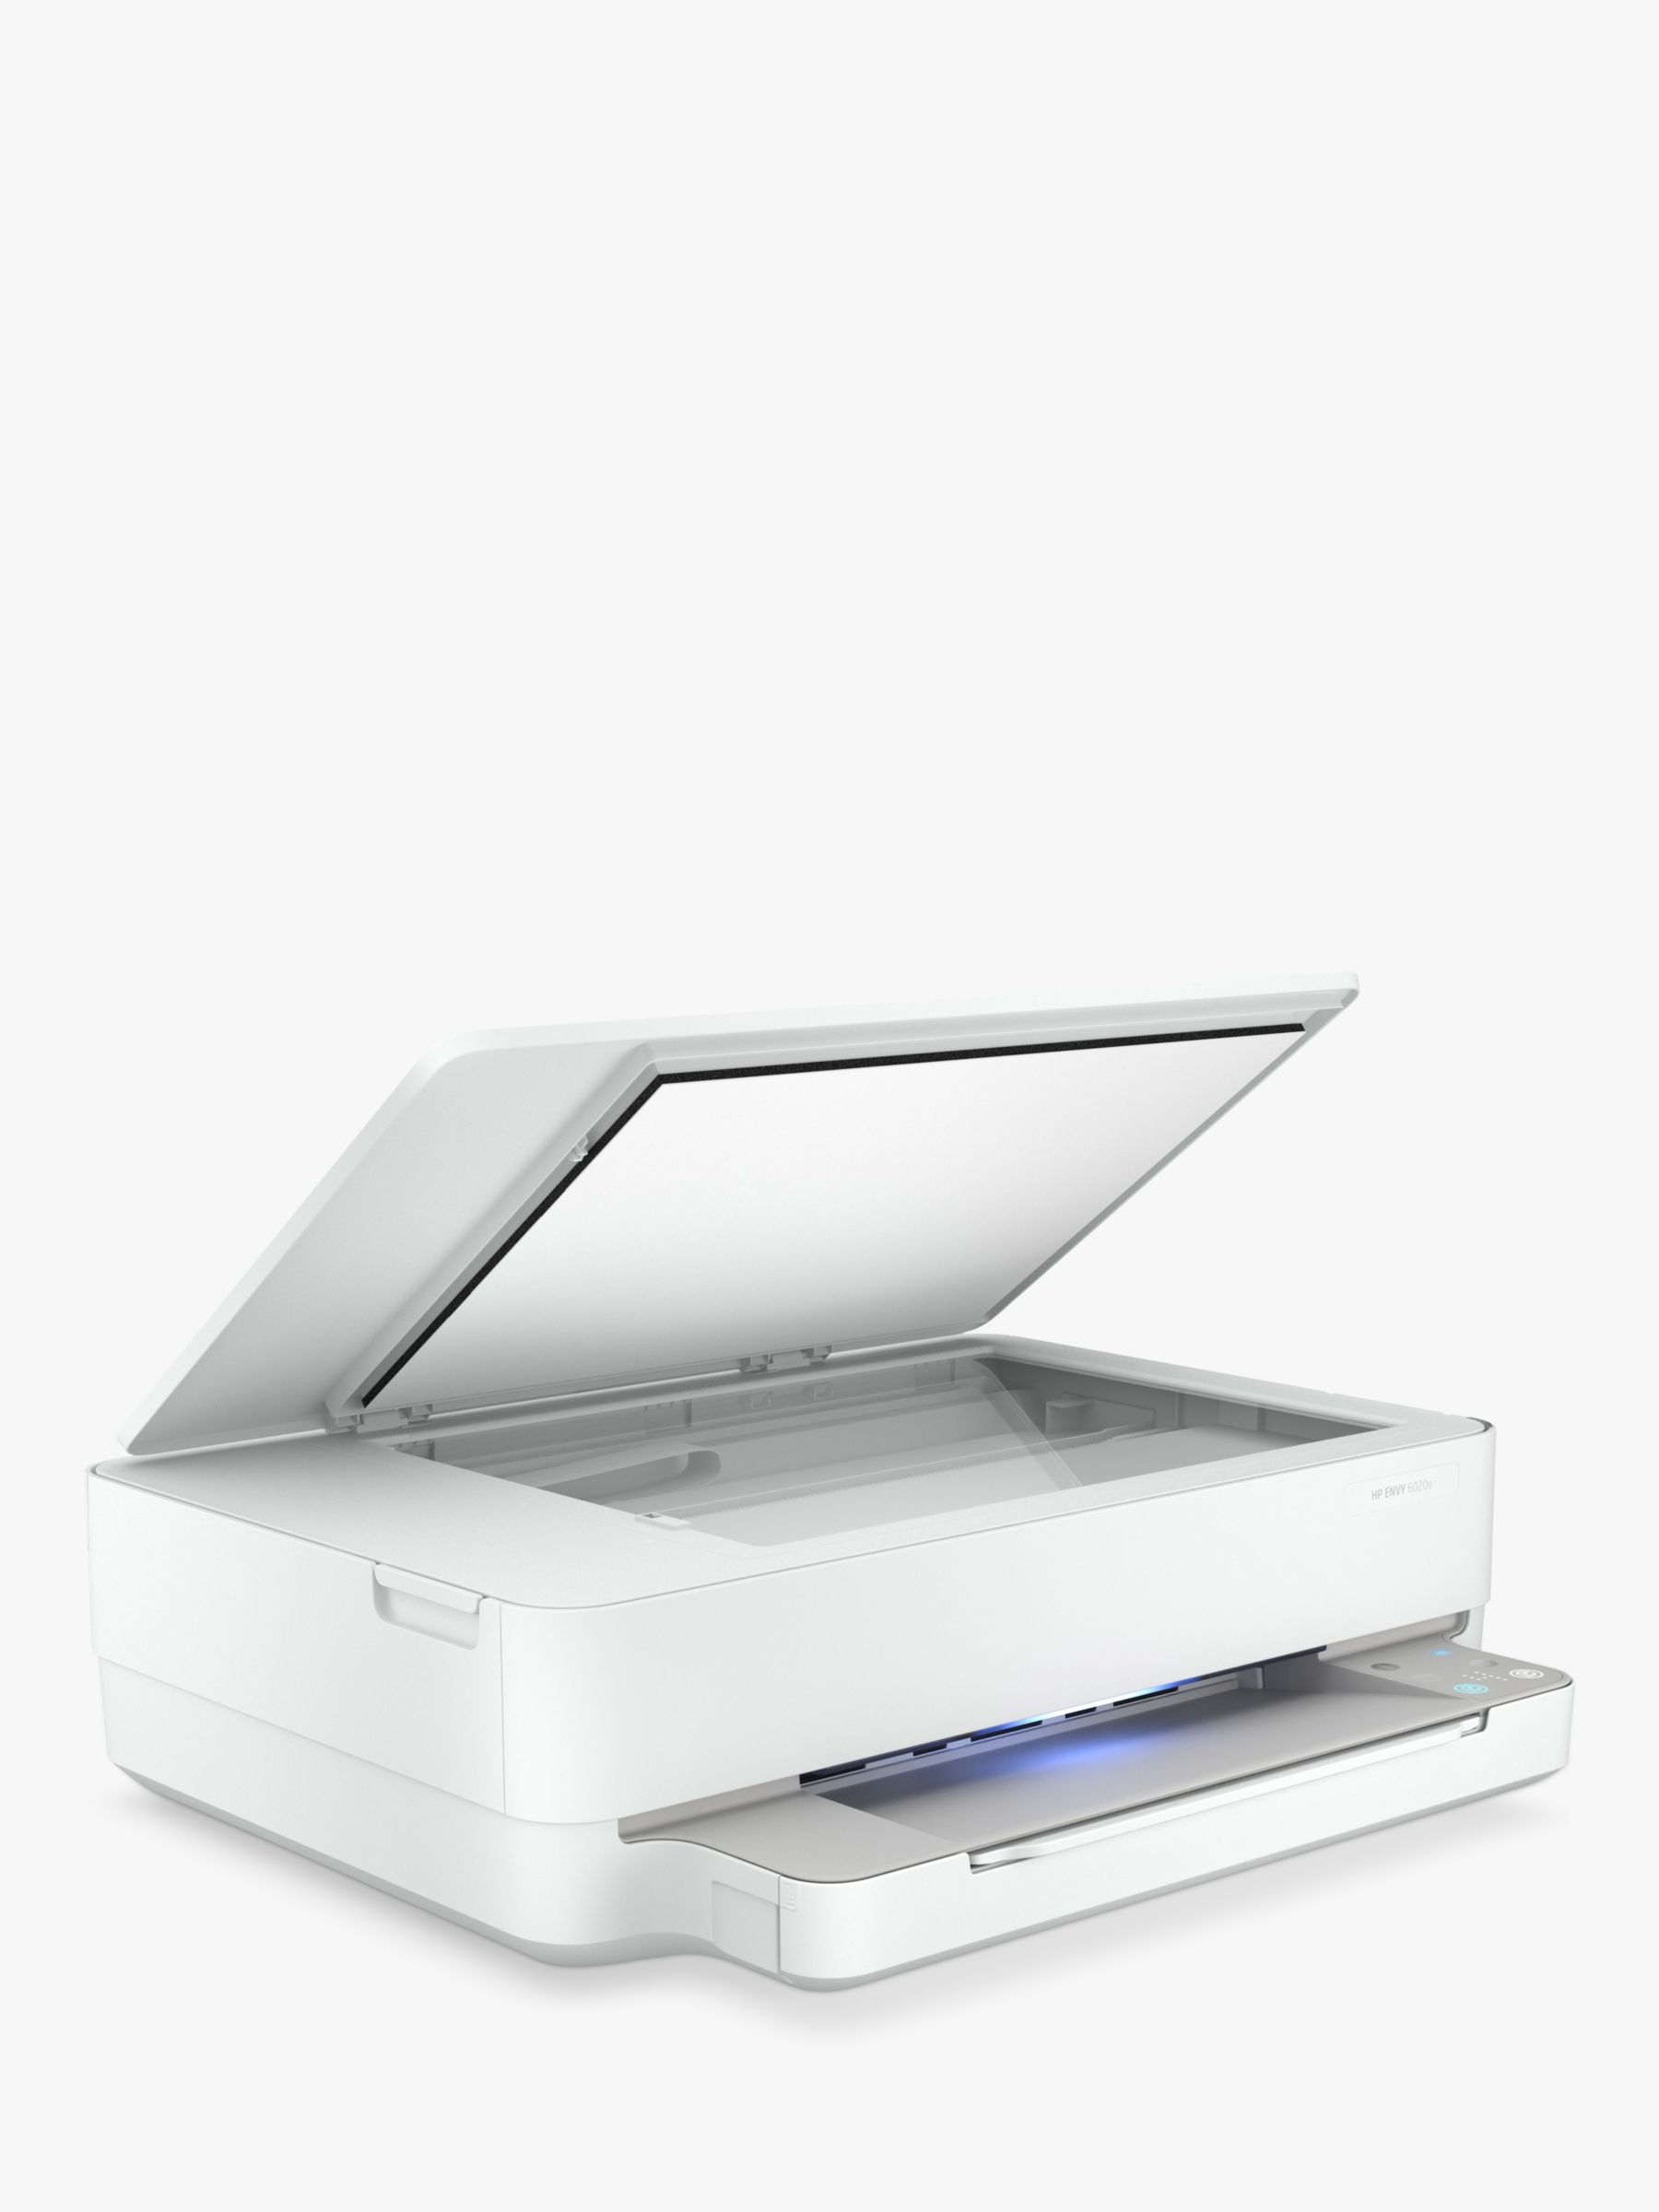 & HP+ 6020e All-In-One HP Compatible, ENVY Wireless Enabled Printer, Instant HP Cement Ink